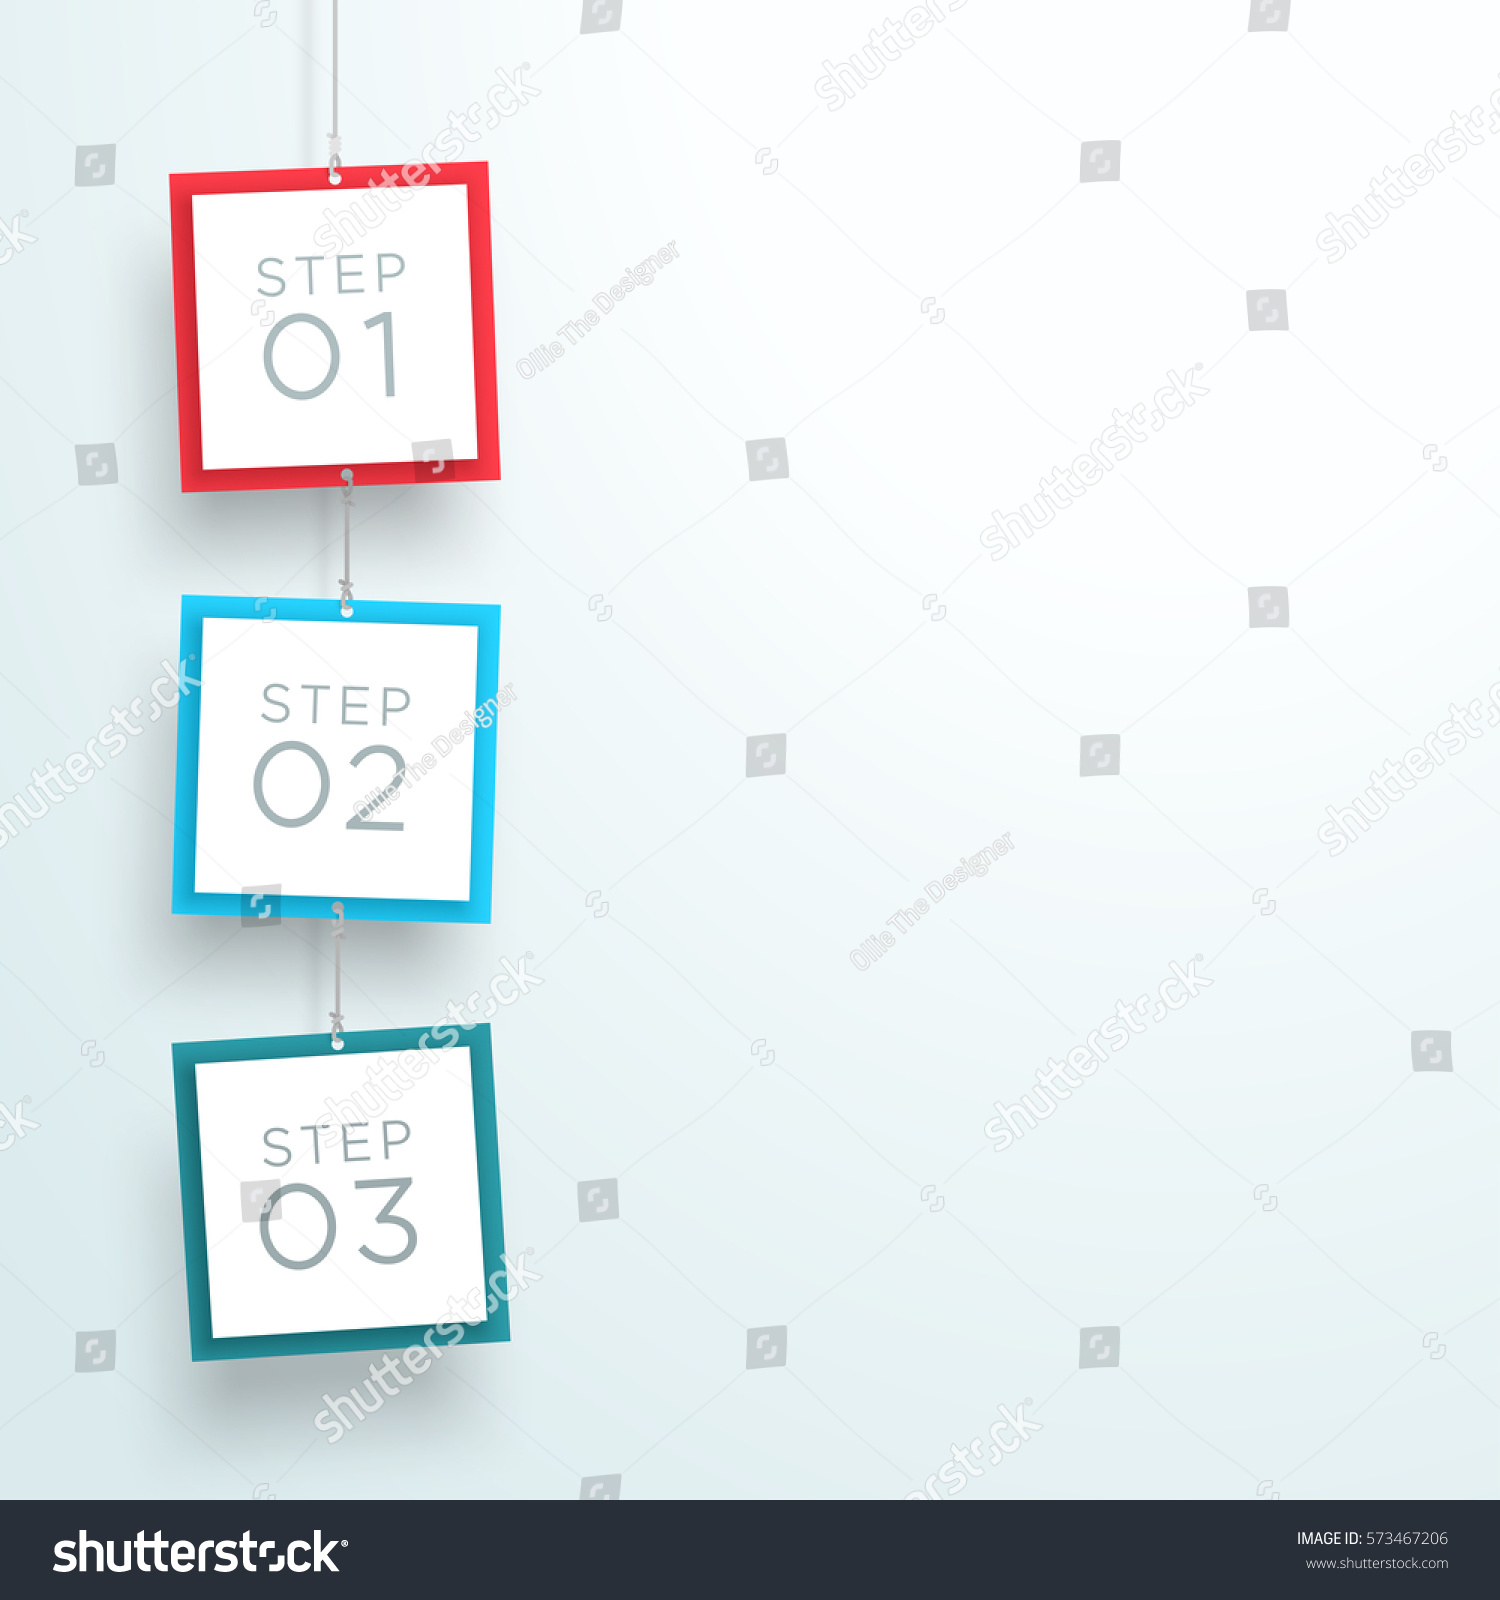 Infographic 3 Steps 3d Hanging Signs Stock Vector Royalty Free 573467206 Shutterstock 0670